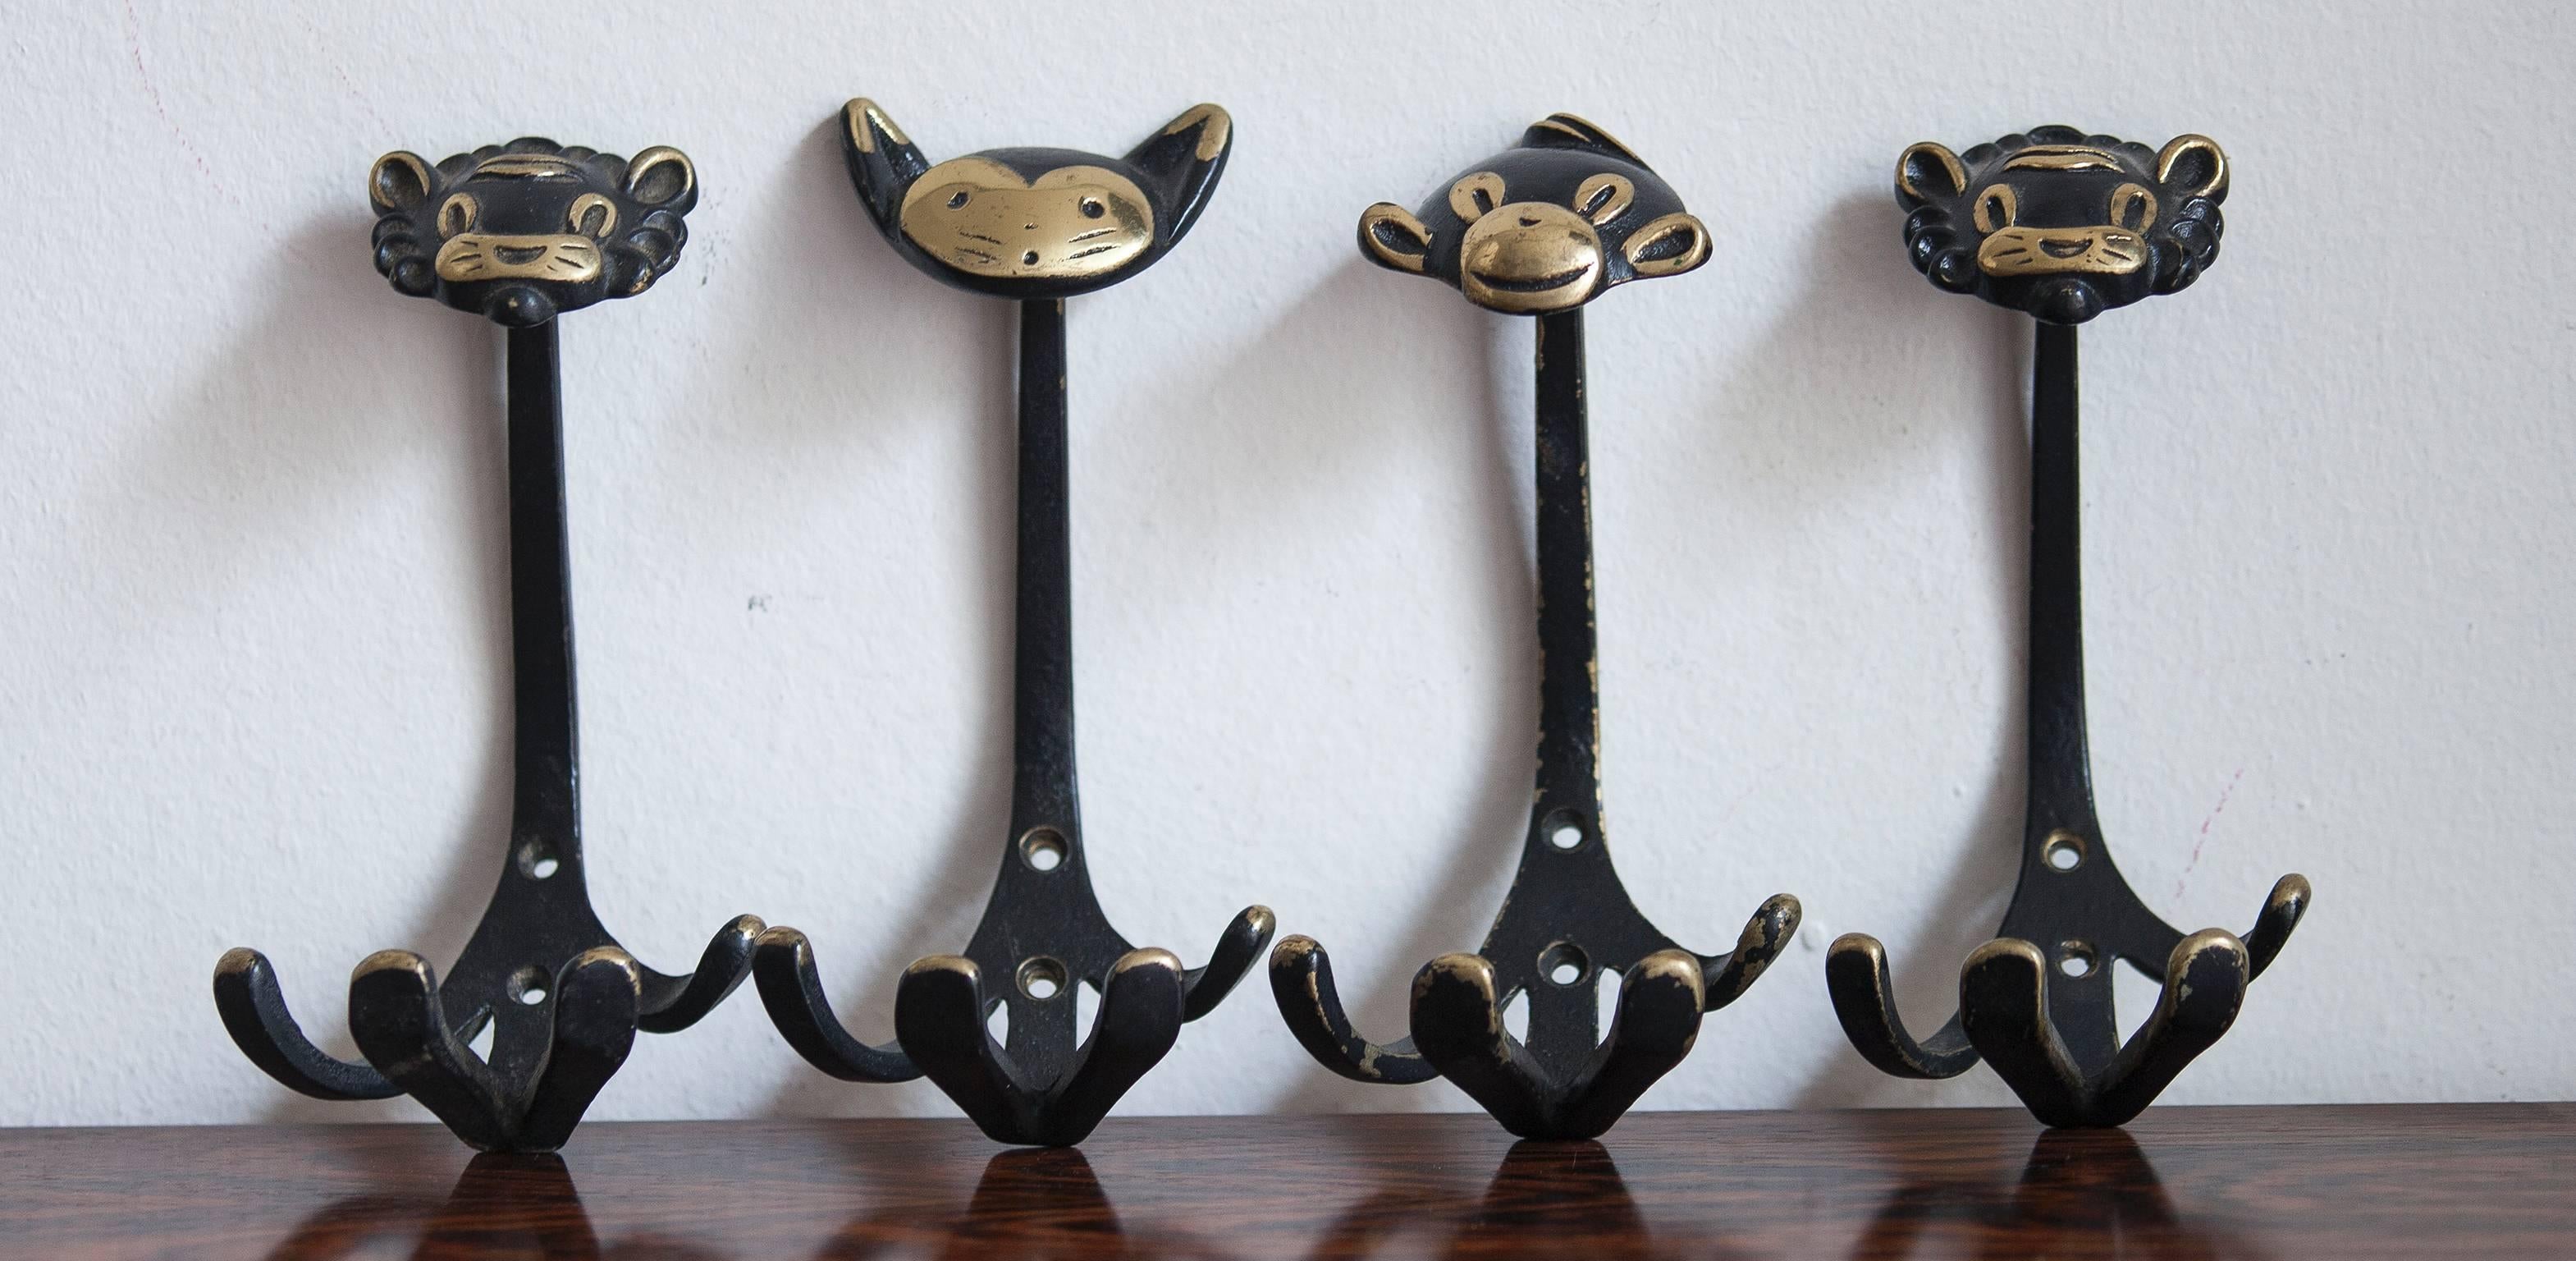 A set of 11 Austrian modernist brass wall coat hooks, displaying a three lions, three cats, a cow, two monkeys, a donkey and a rabbit. A very humorous design by Walter Bosse, executed by Hertha Baller Austria in the 1950s. Made of black finished